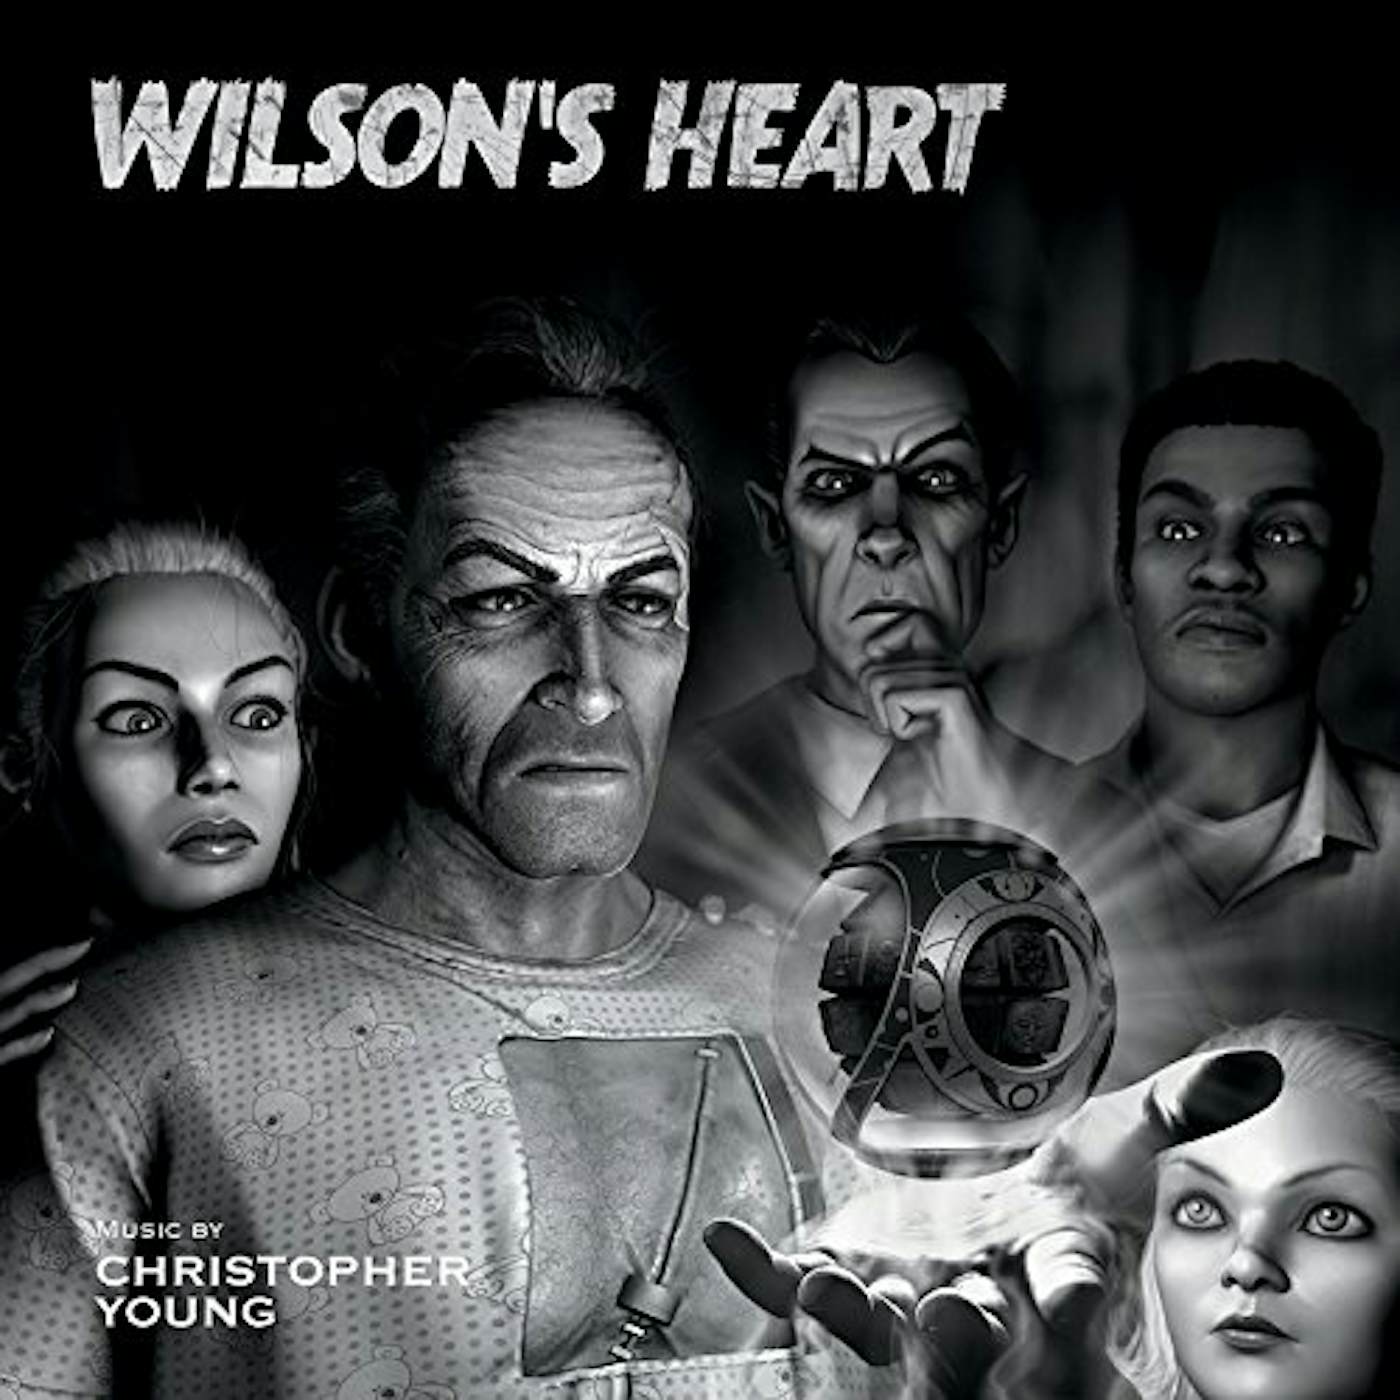 Christopher Young WILSON'S HEART CD